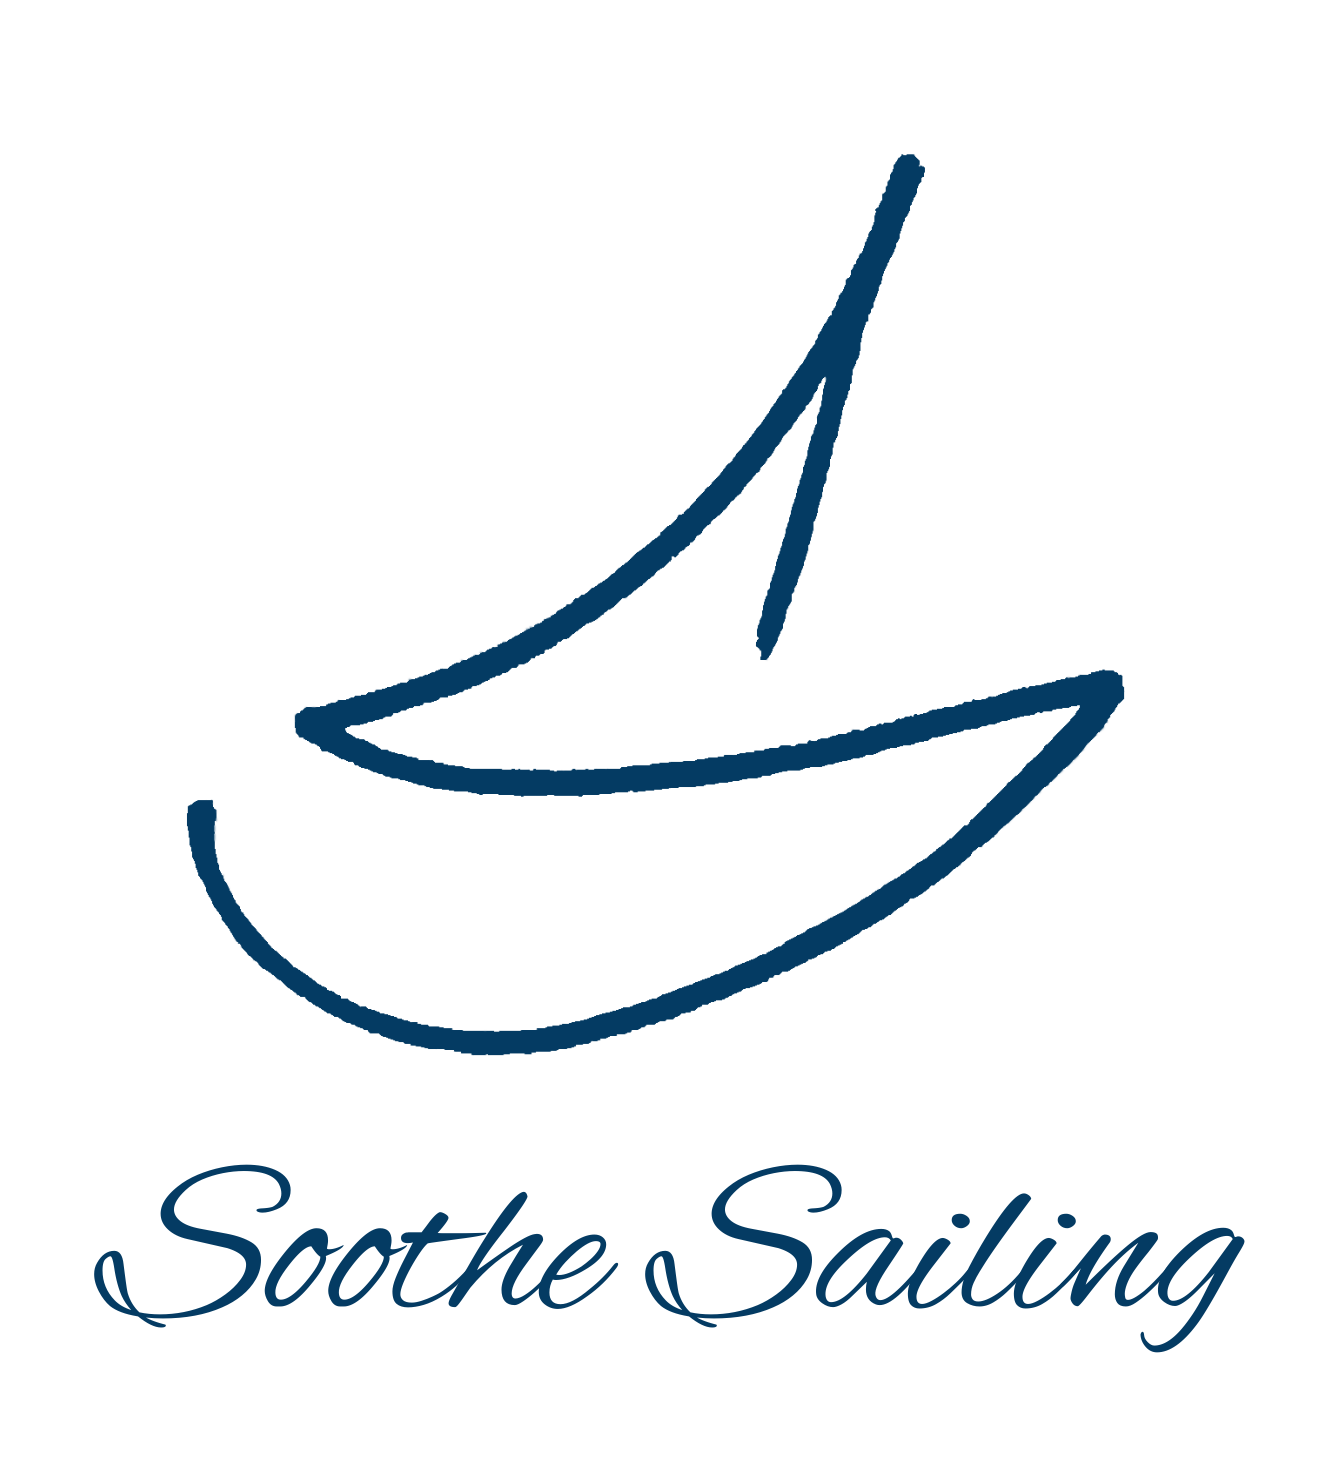 Soothe Sailing